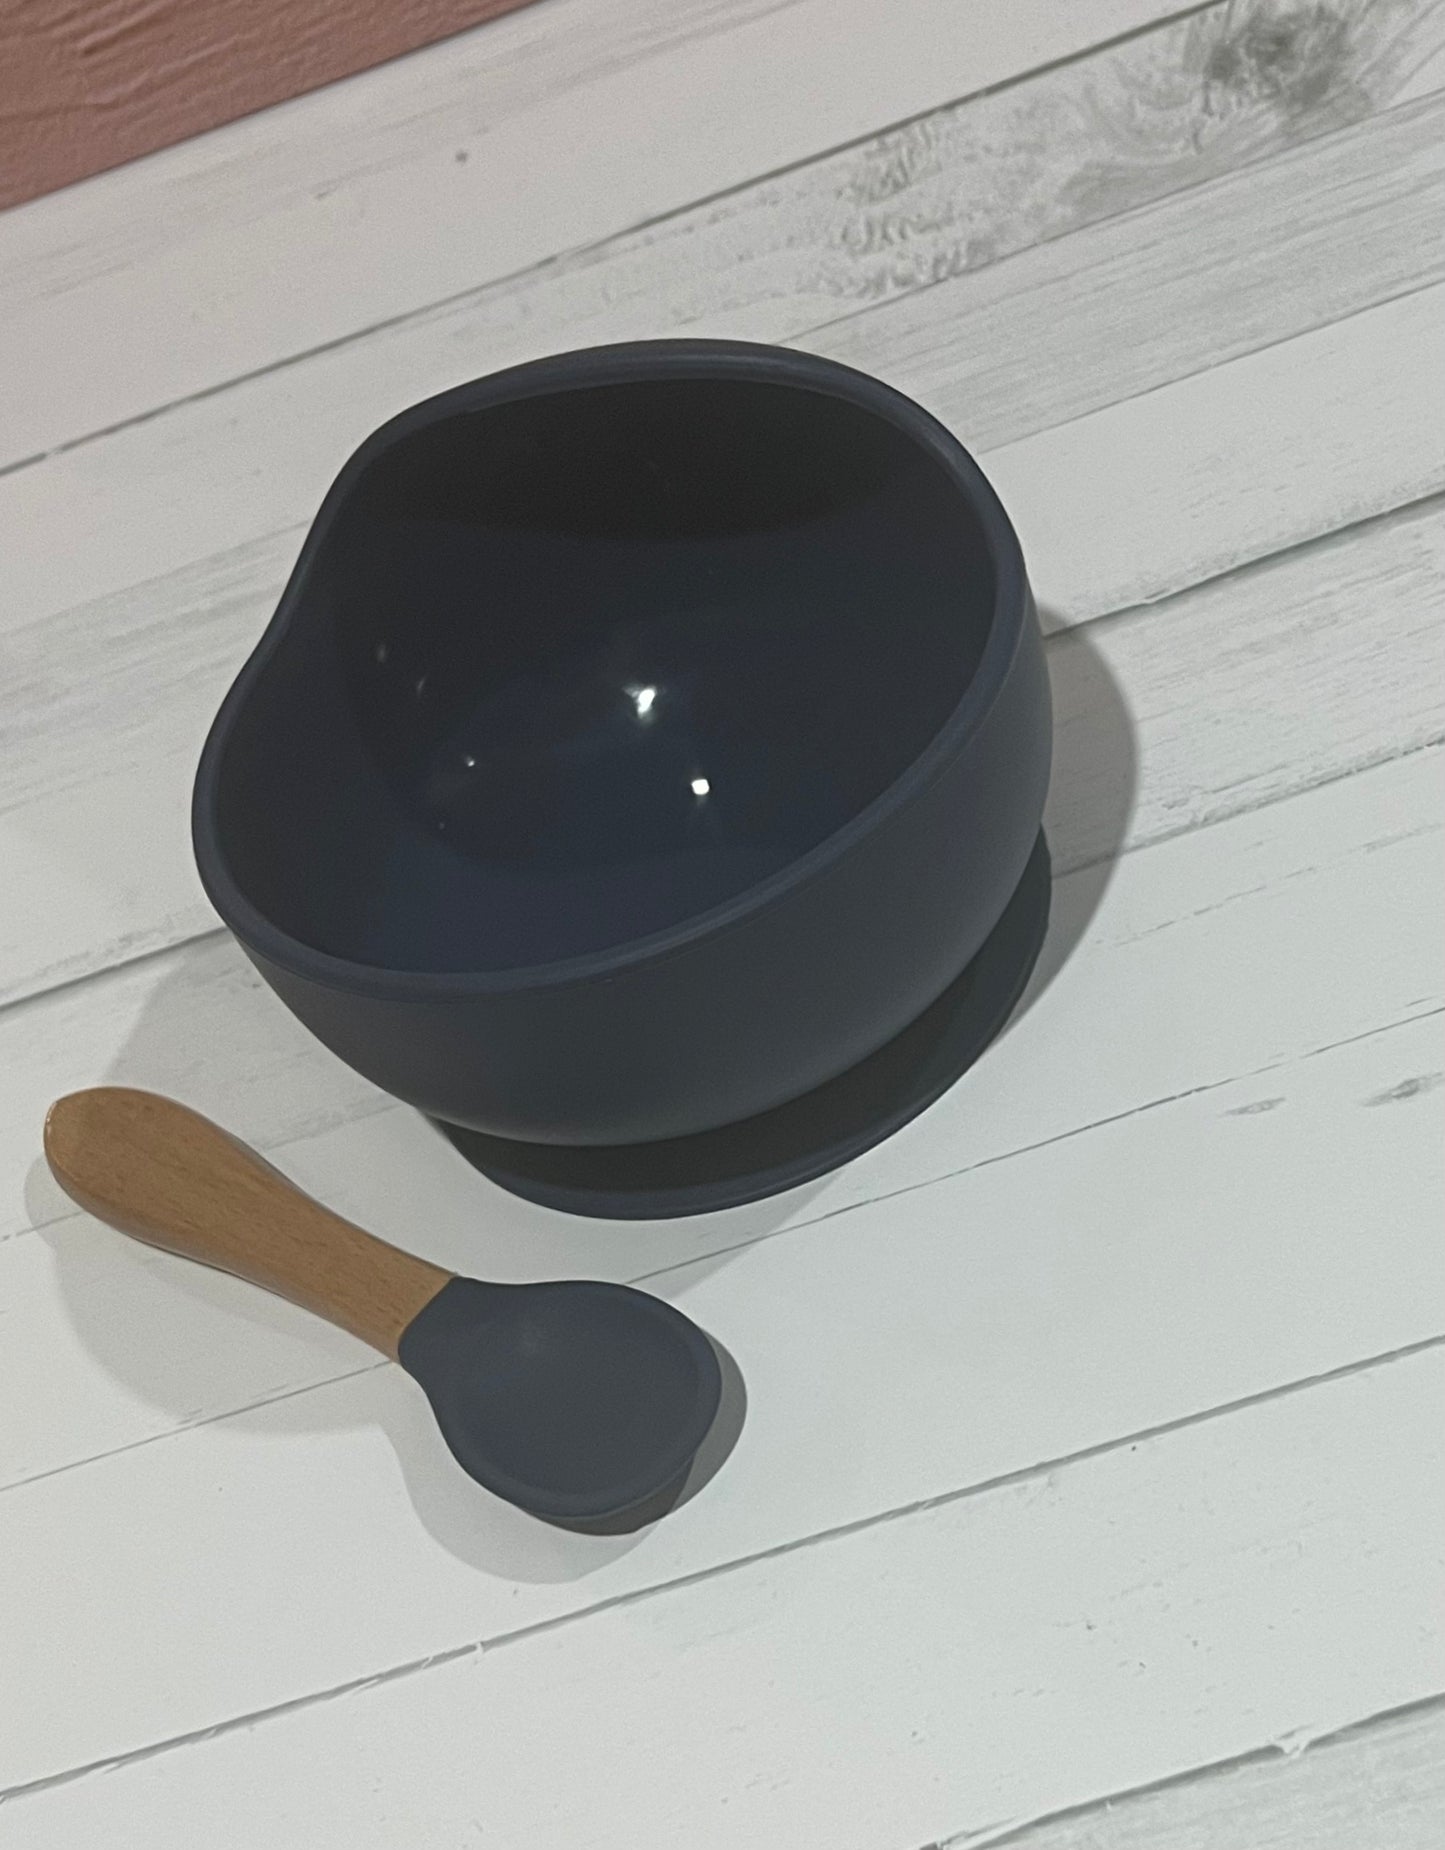 Silicone, suction bowl and spoon set